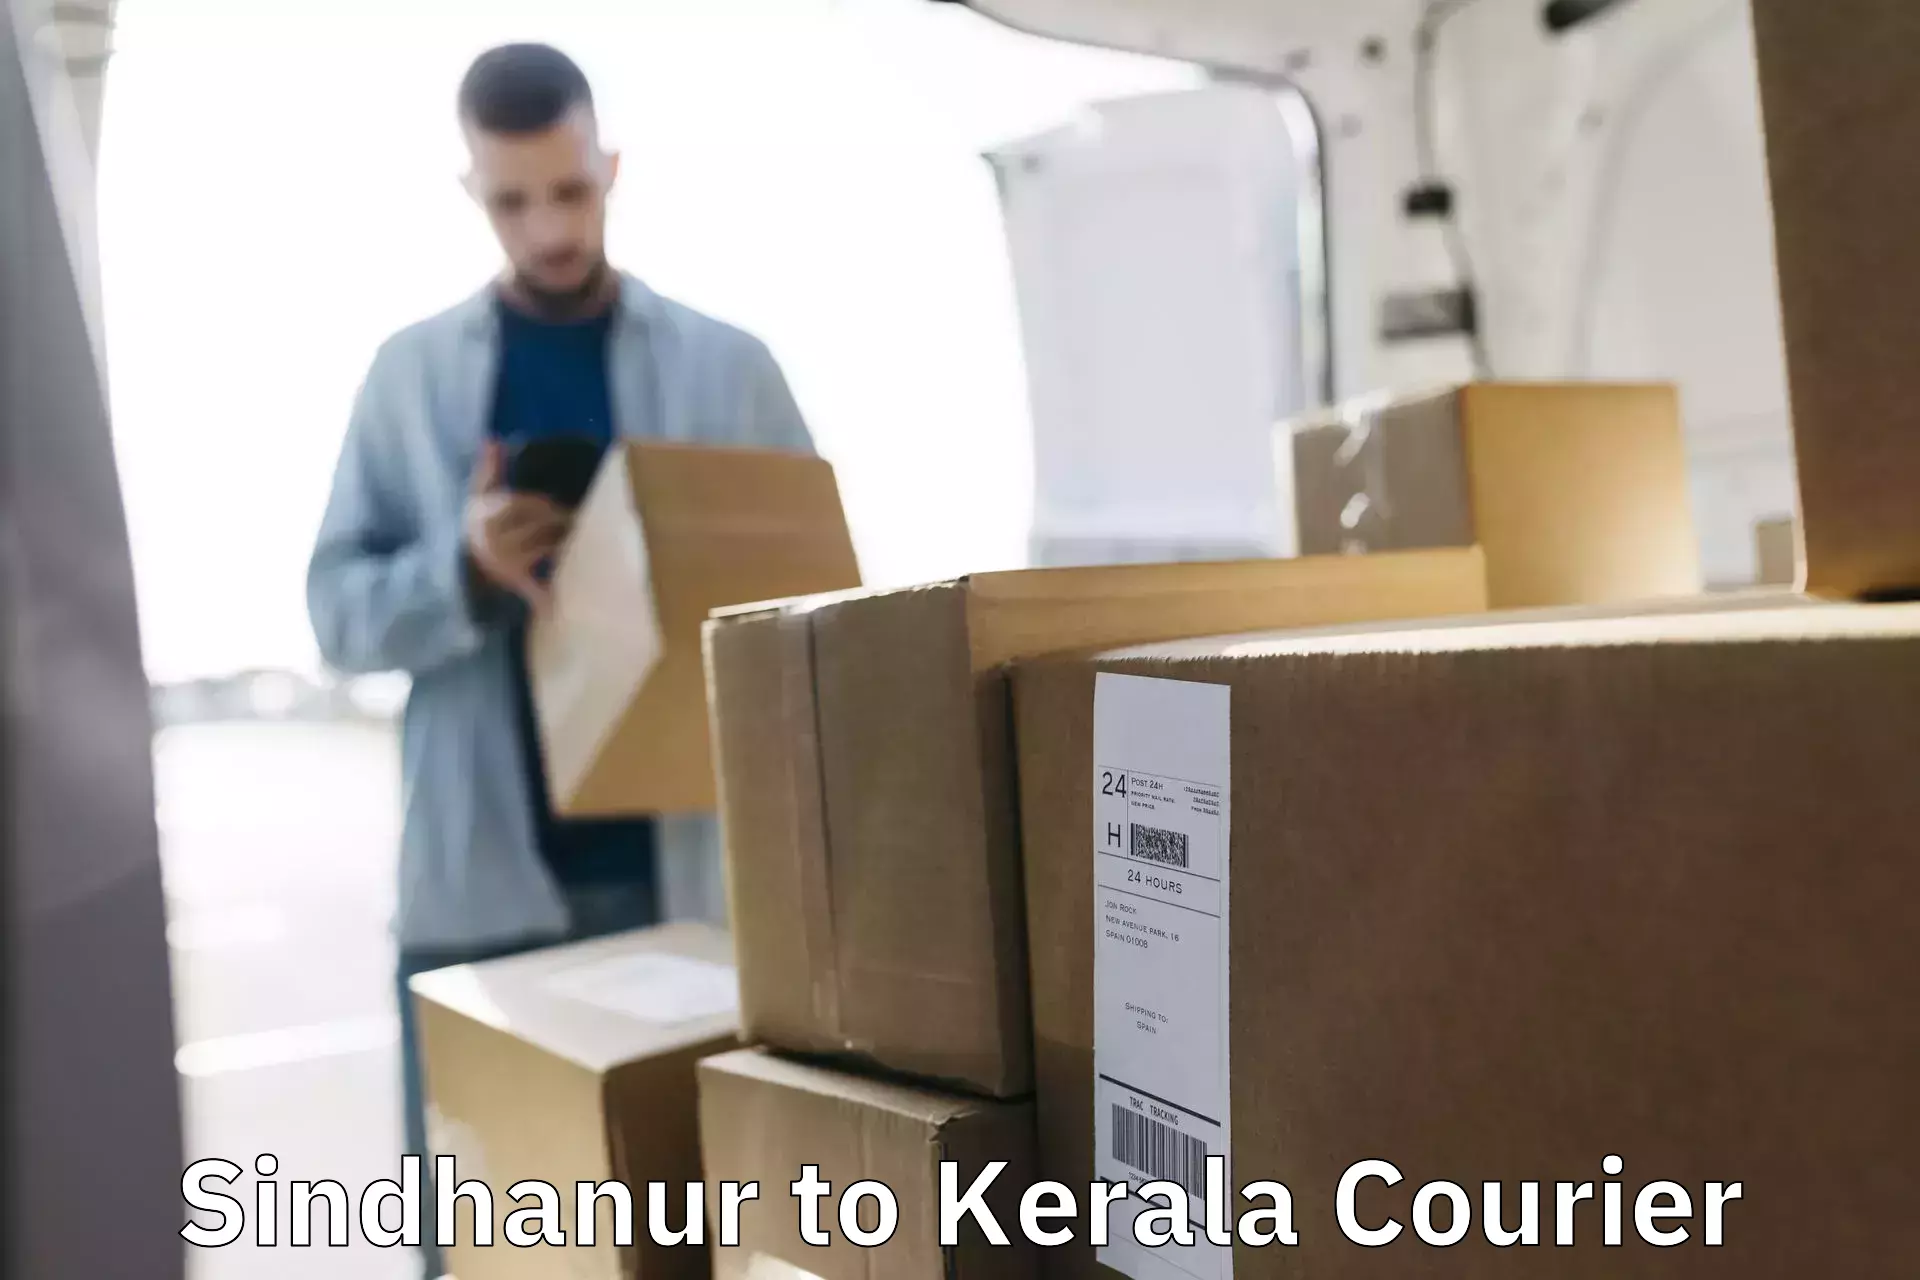 Professional courier services Sindhanur to Kerala